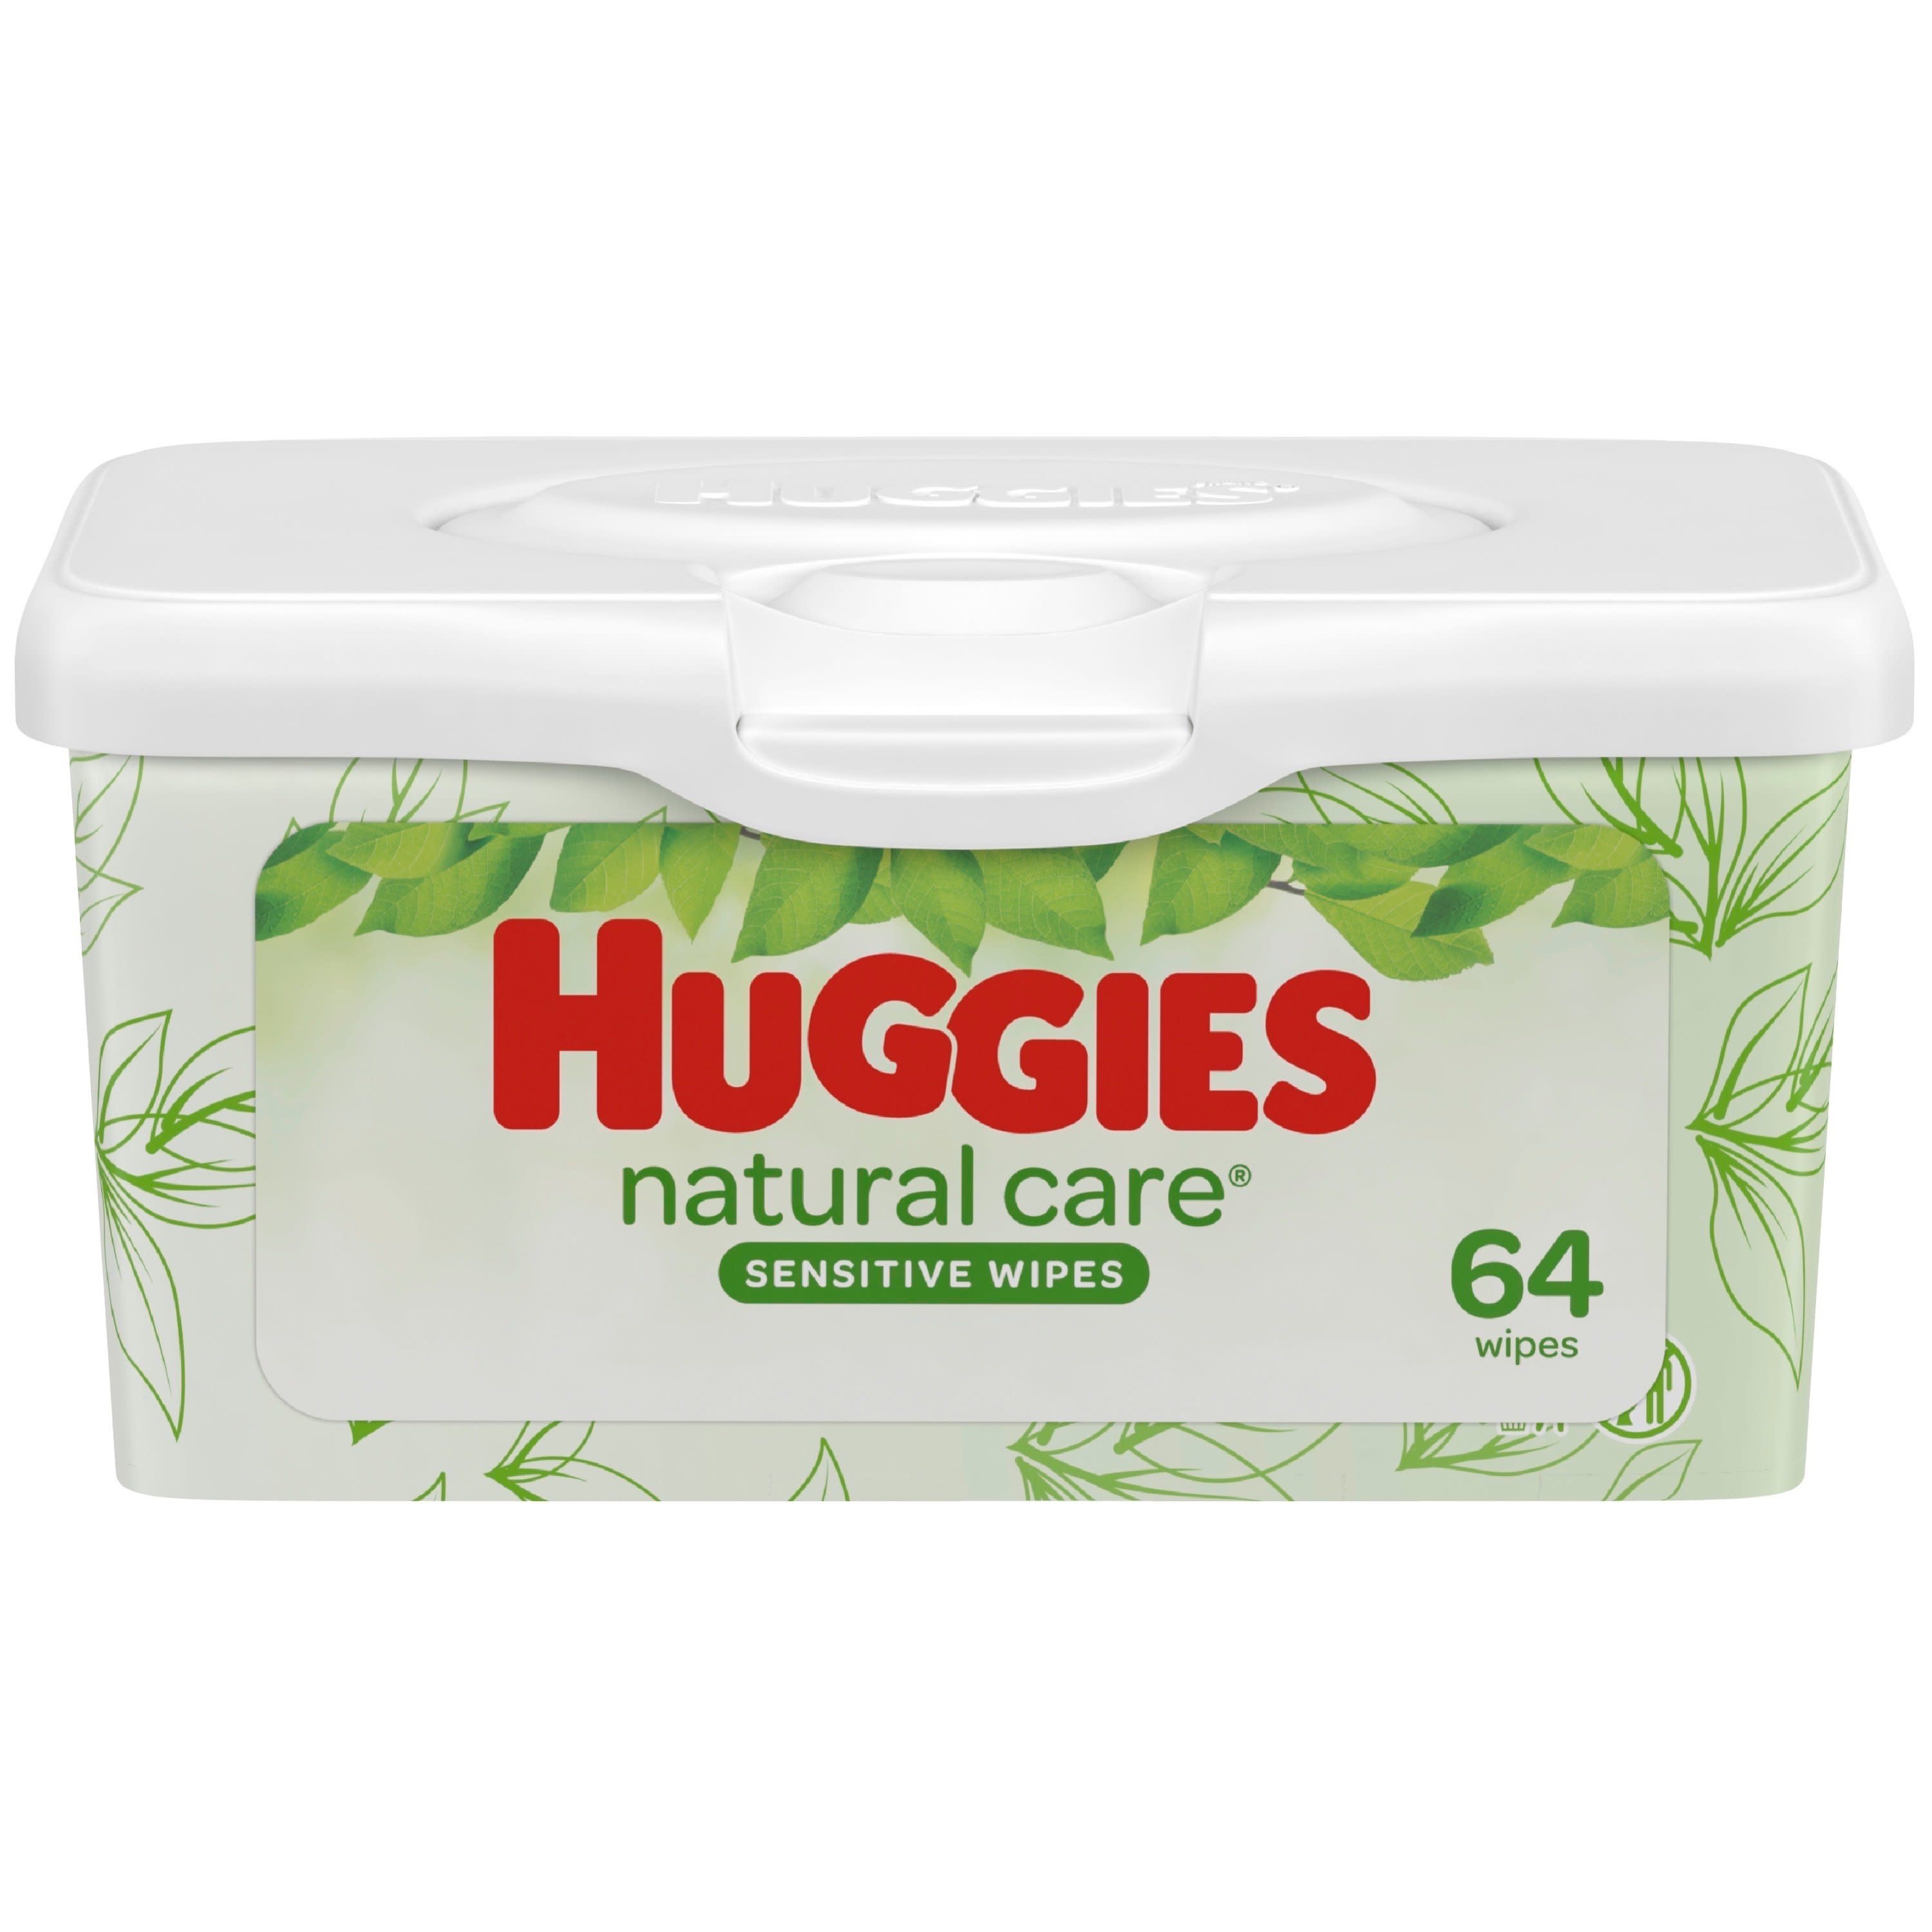 Huggies Natural Care Wipes - 64/Tub, 4 Tubs/Case - image 1 of 9